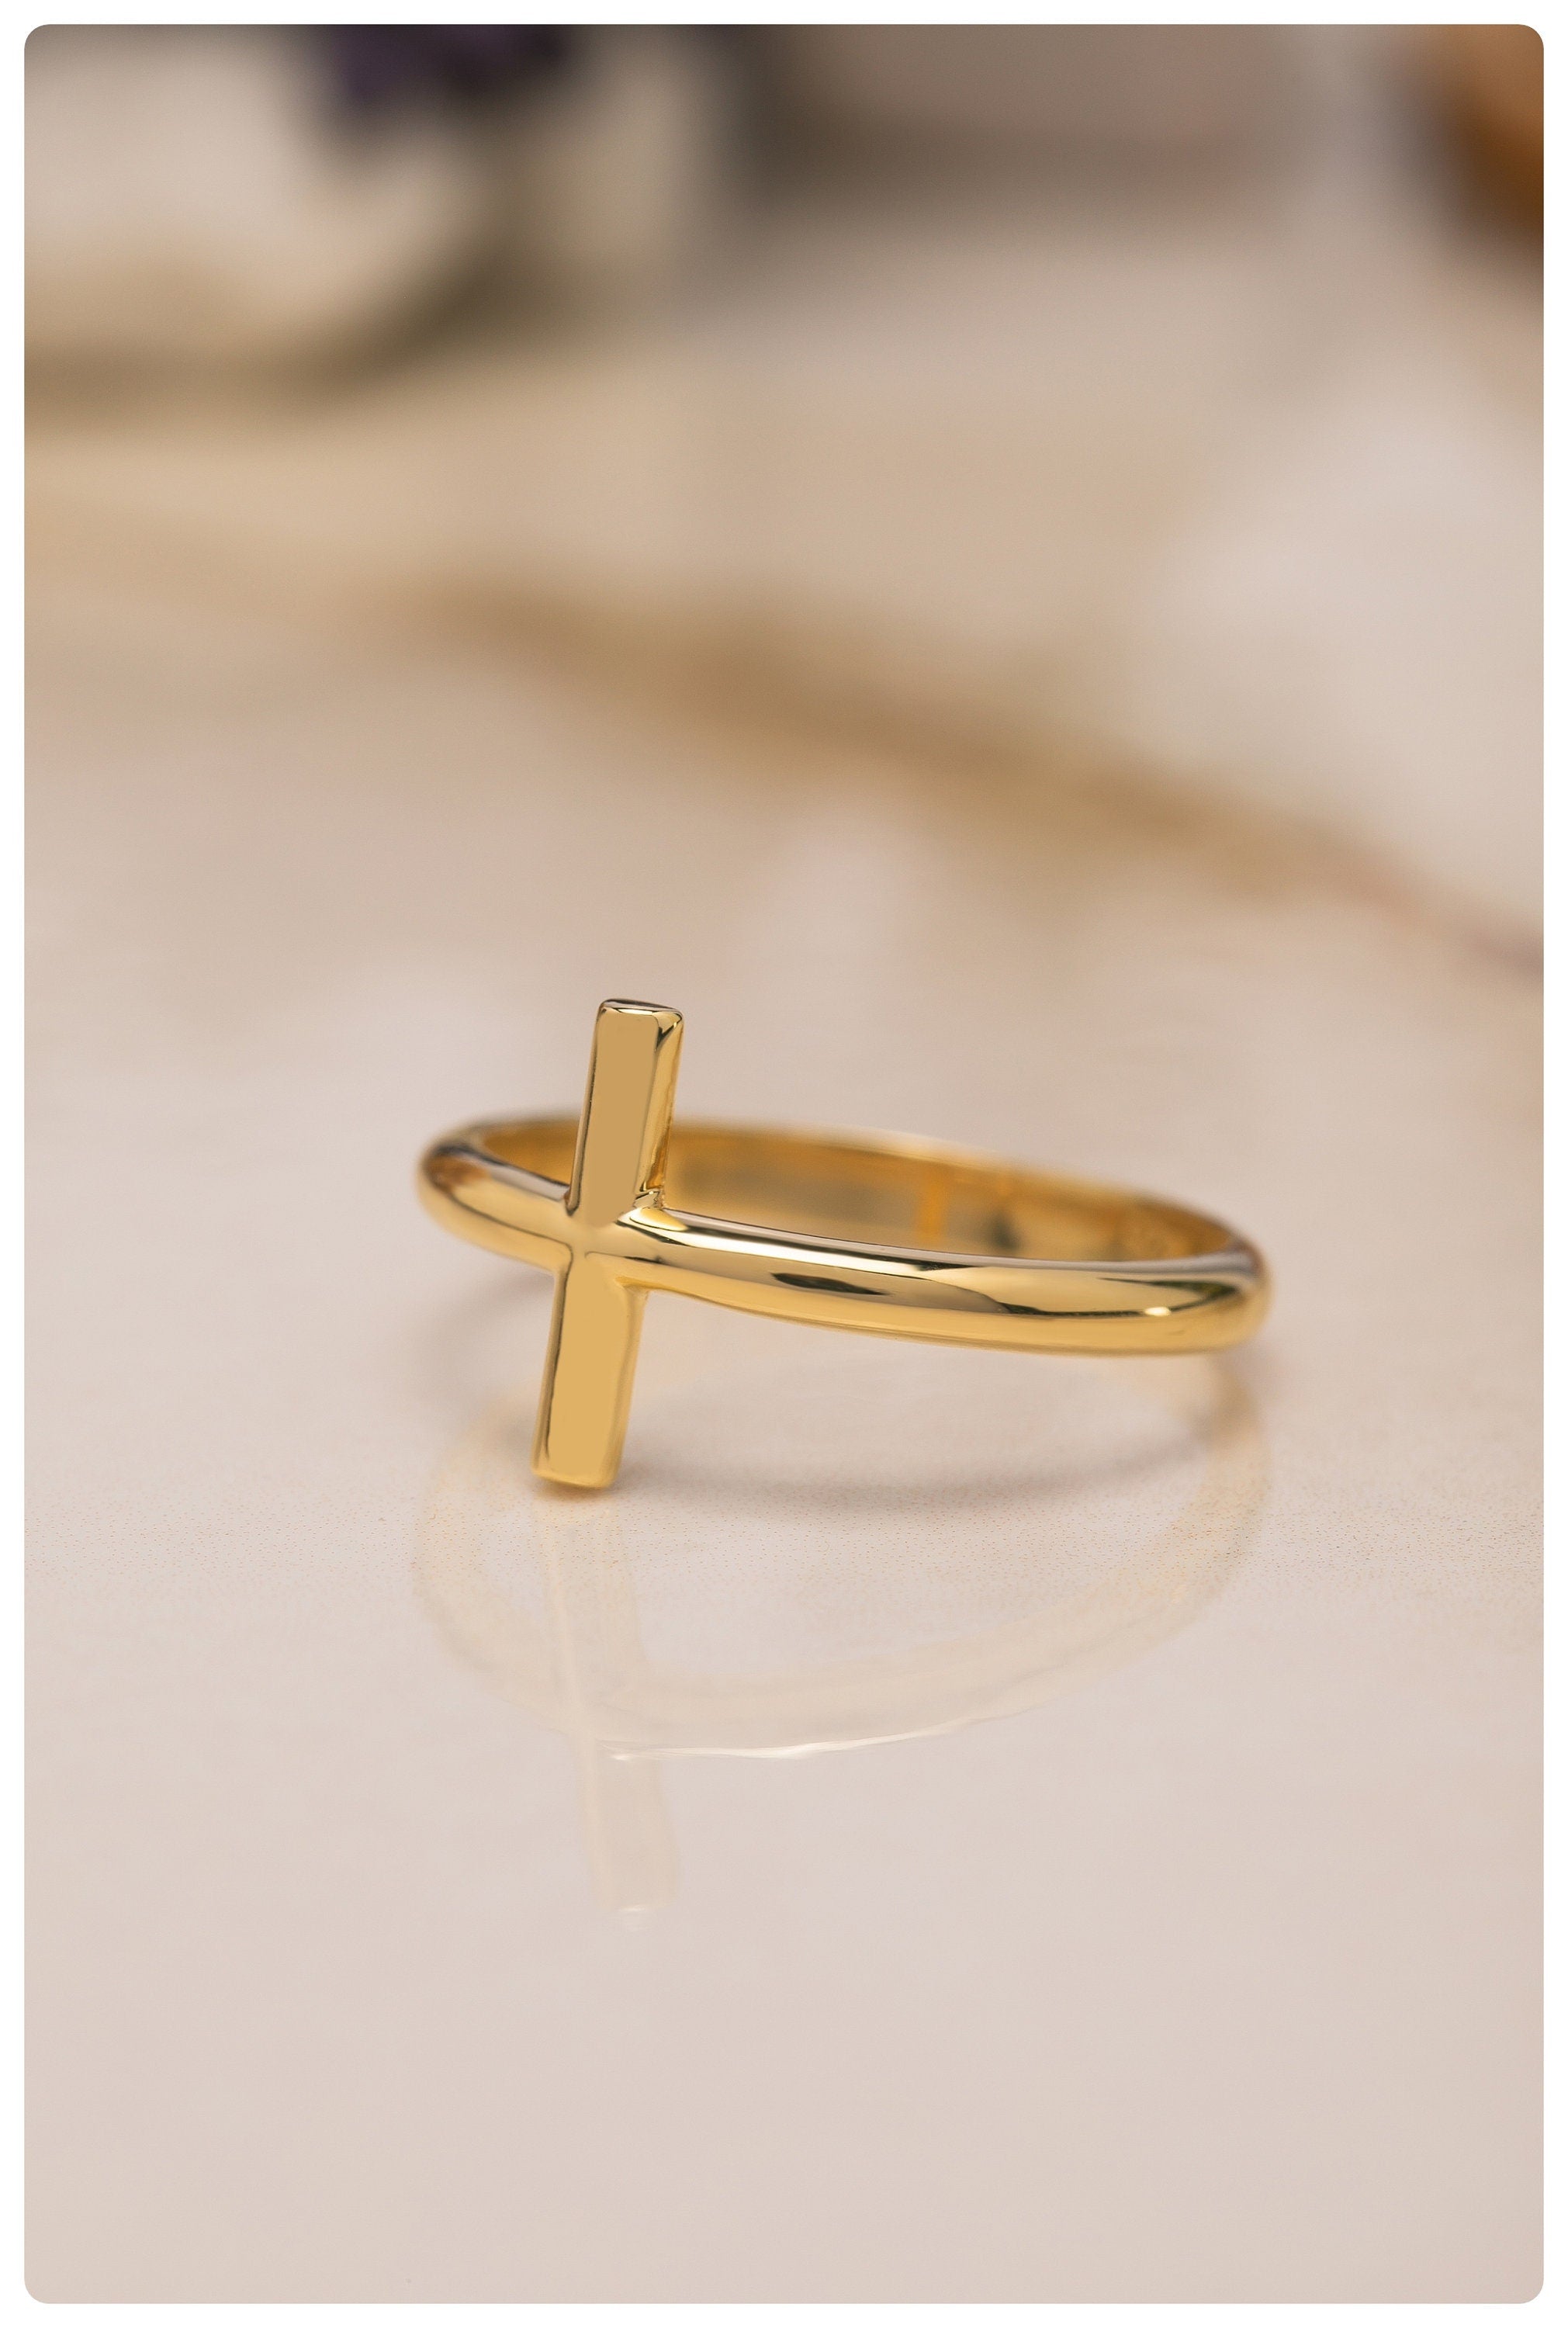 14K Solid Gold Signet Cross Ring - Minimalist Religious Ring - 925 Sterling Silver Cross Ring - Gift For Mother Day - Mother Day Jewelry